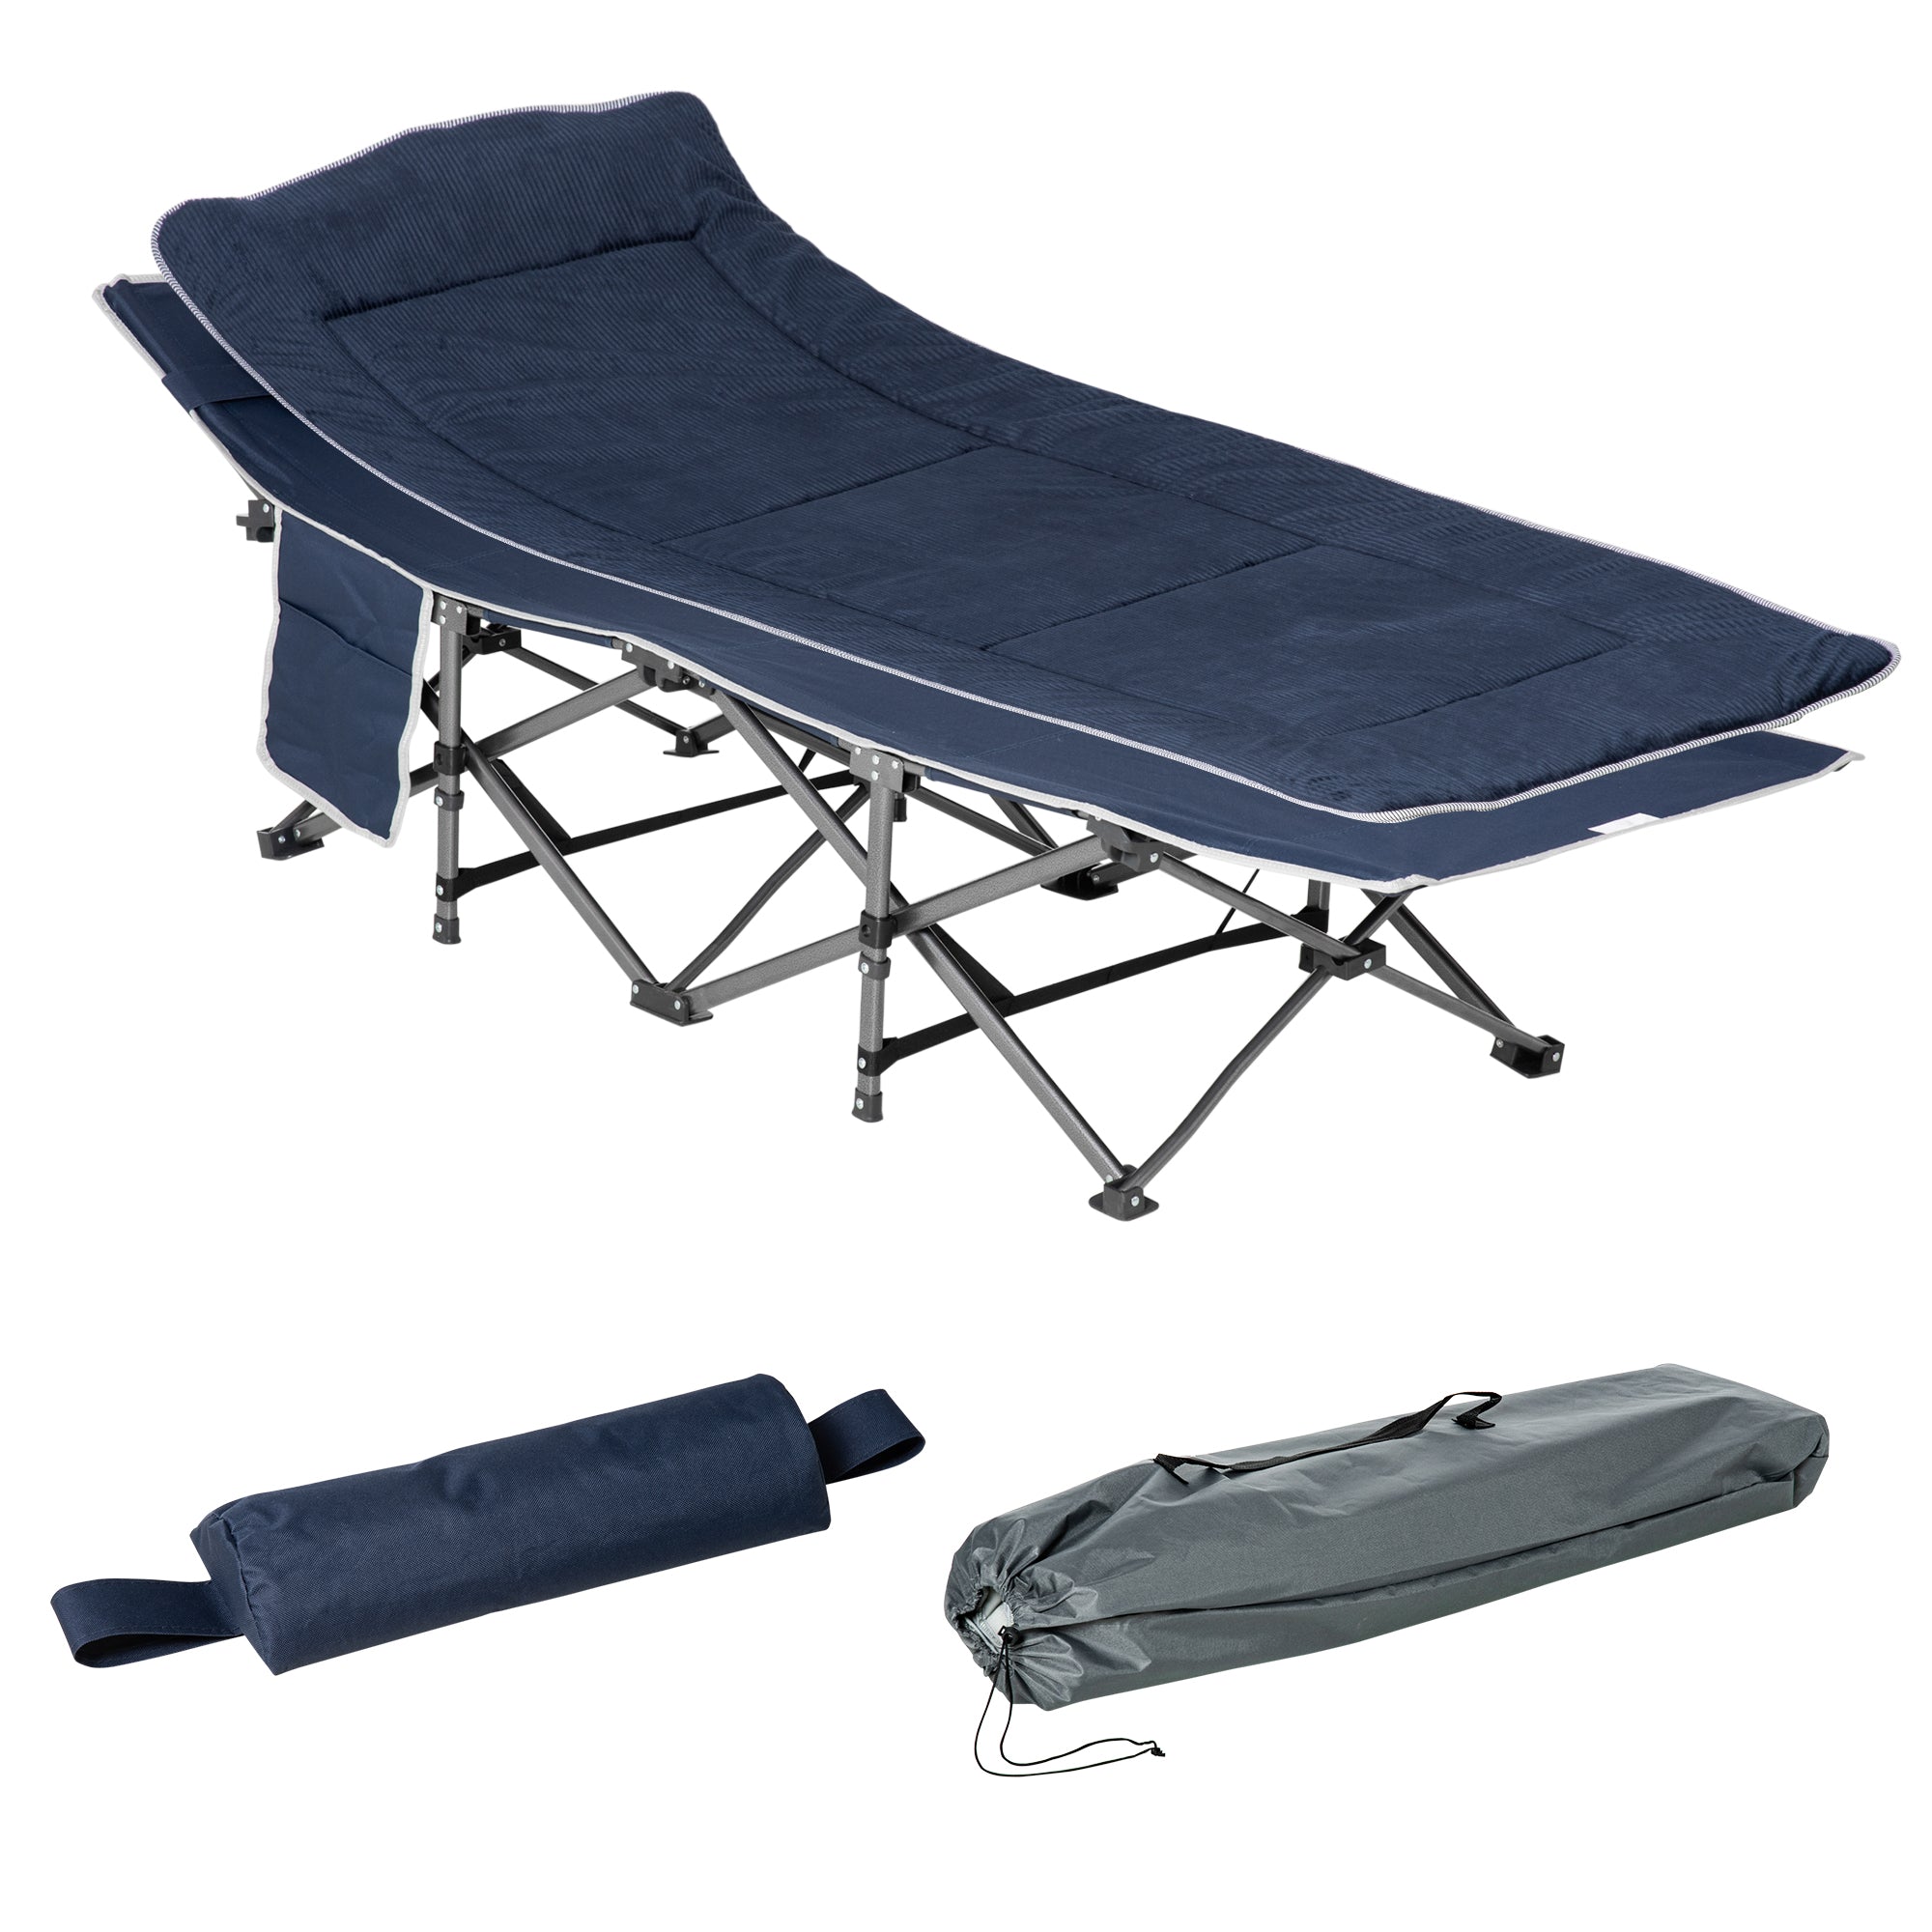 Heavy Duty 2 Person Camping Cot with Mattress for Adults With Portable Carrying Bag, Outdoor Folding Lightweight Sleeping Bed, Blue